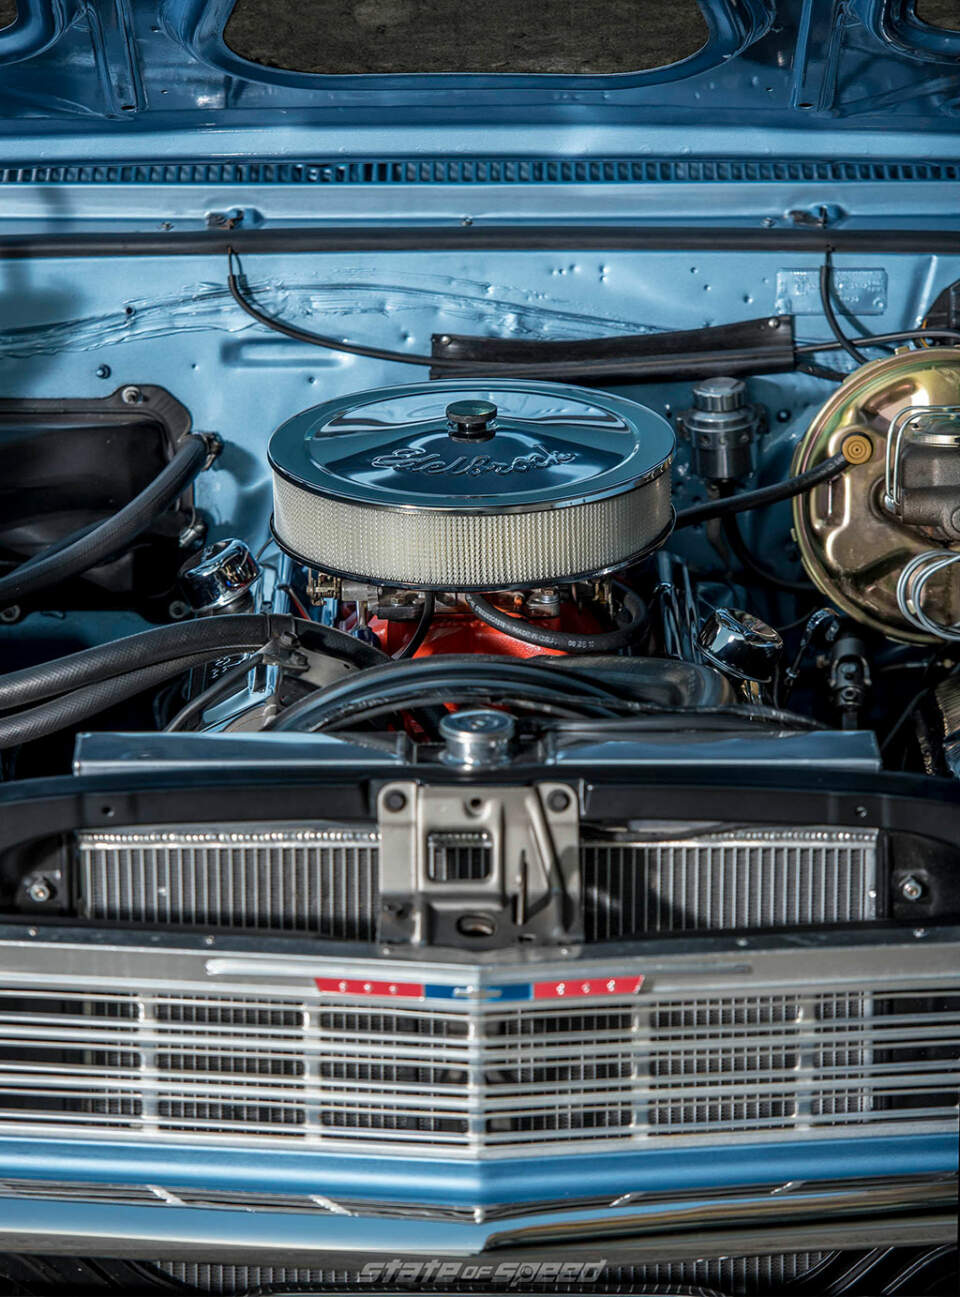 V8 engine in a Chevelle